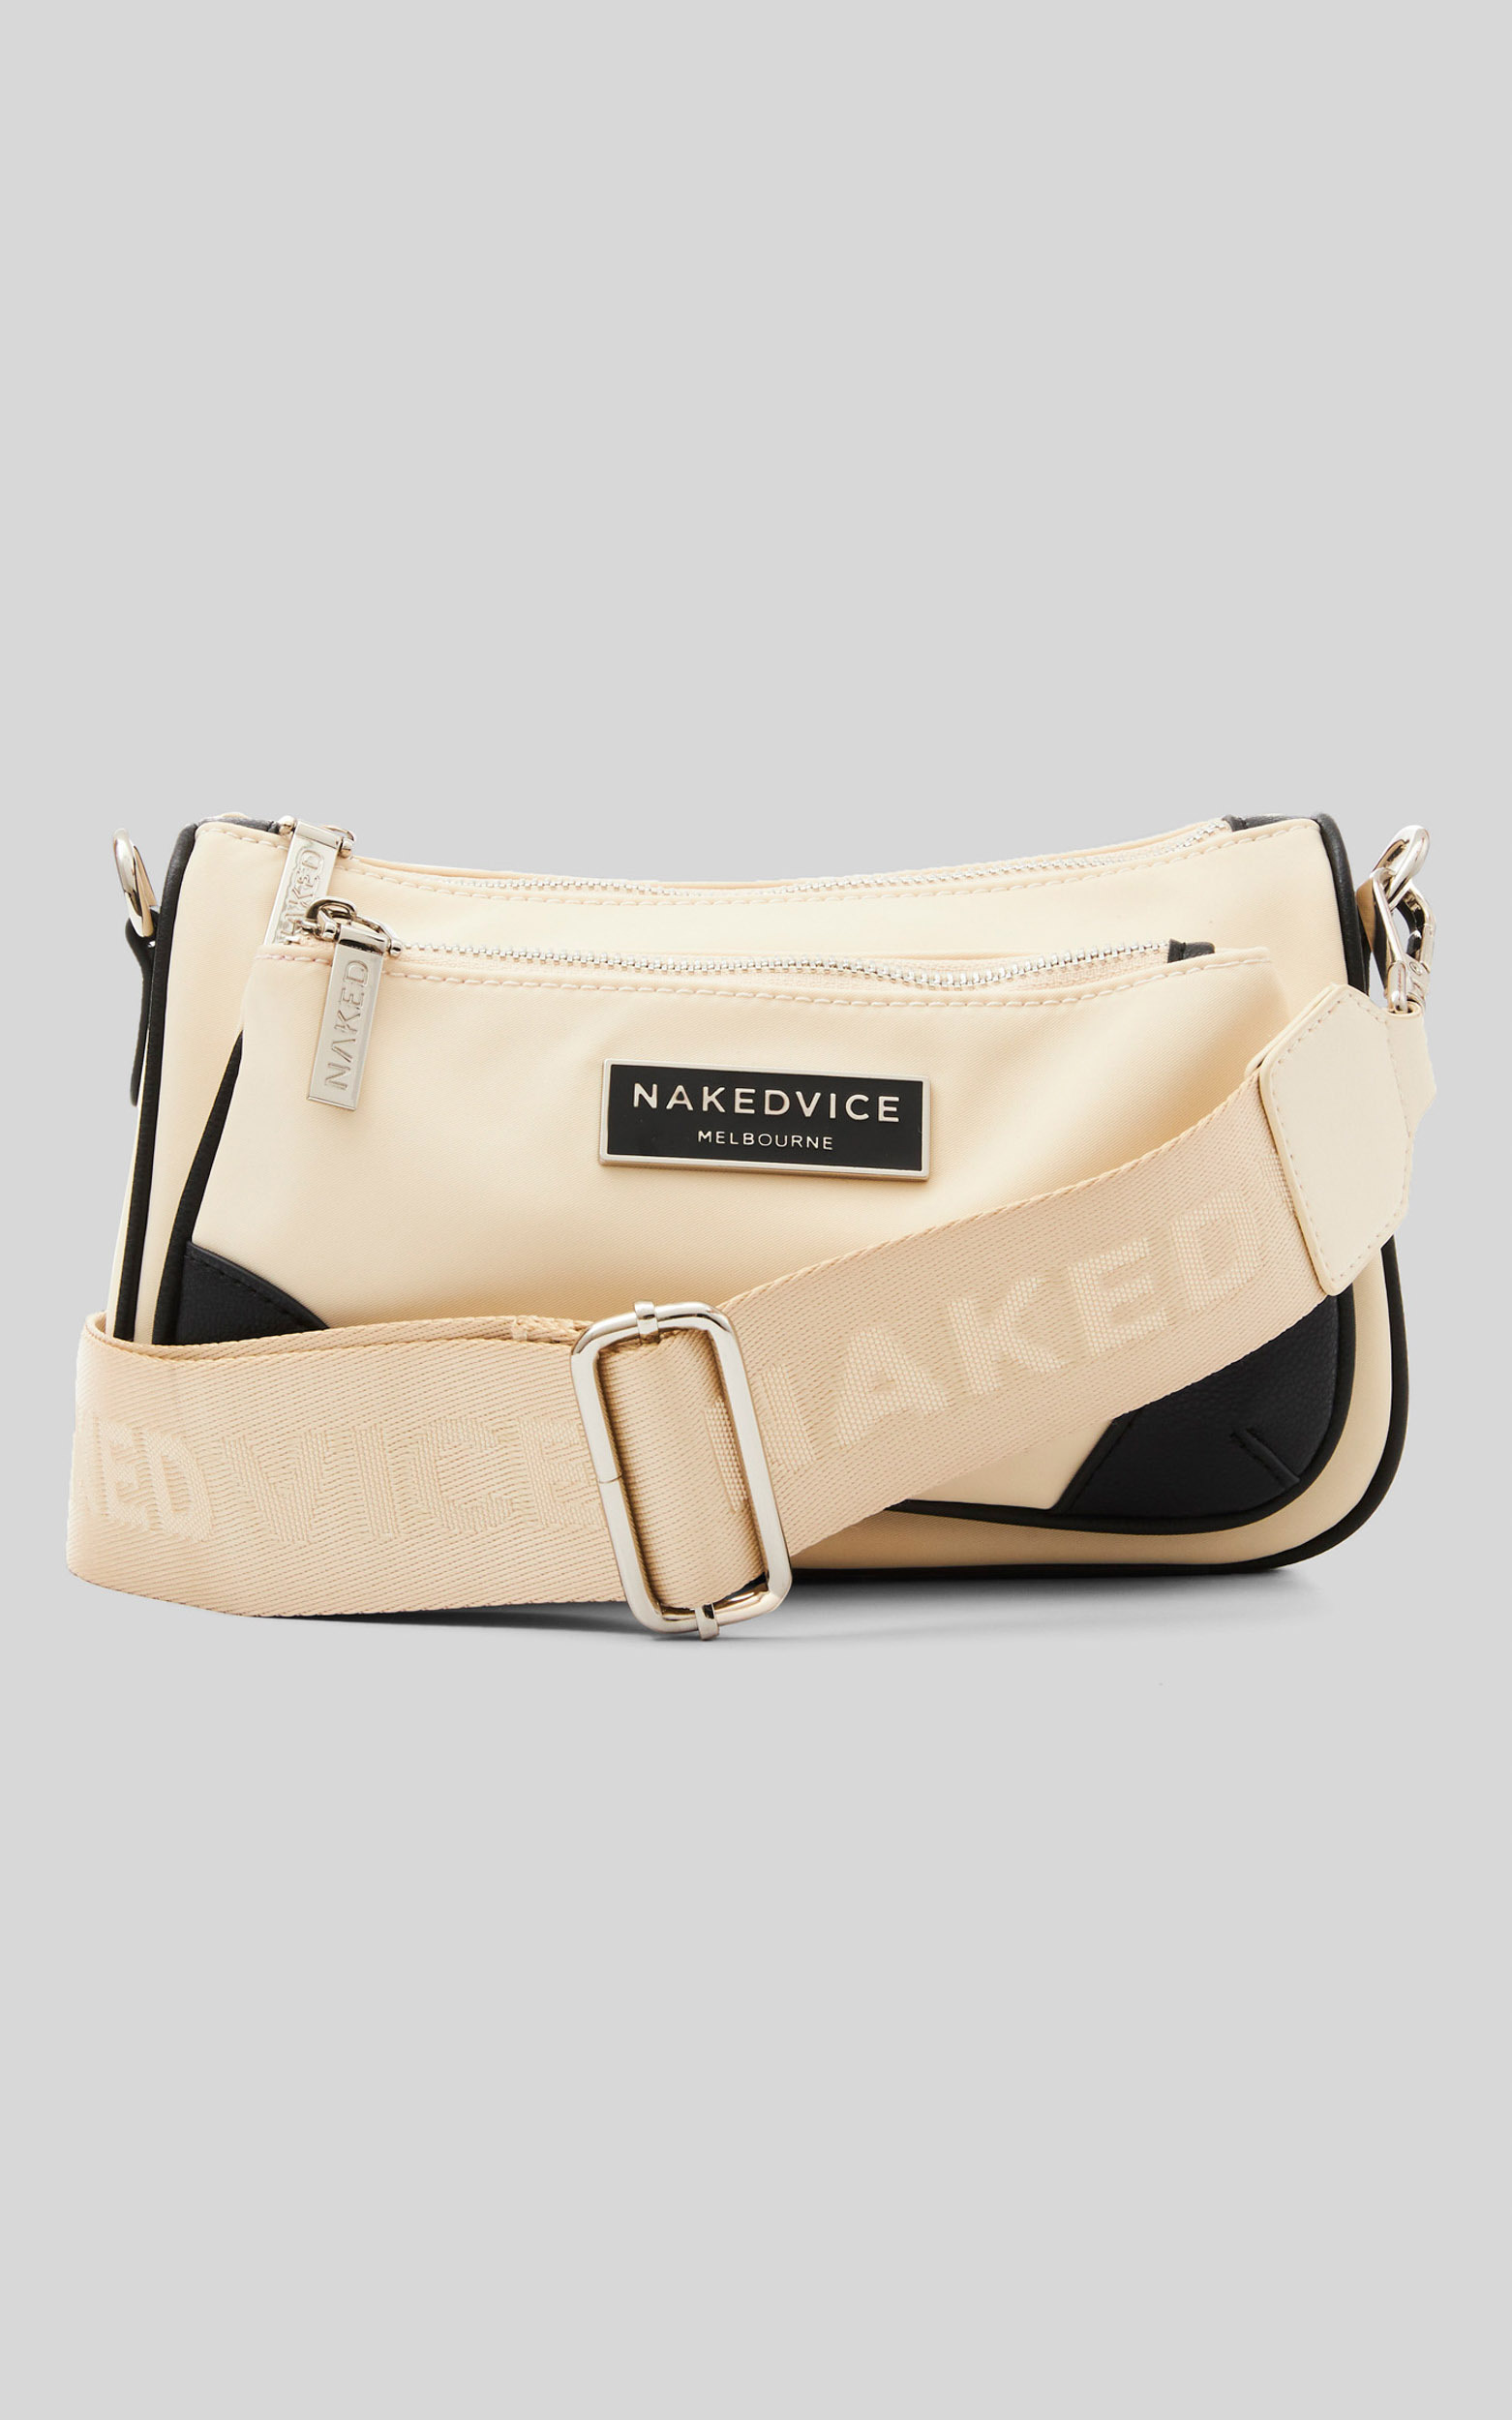 Nakedvice - The Hunter Nylon Bag in Ivory - NoSize, WHT1, hi-res image number null